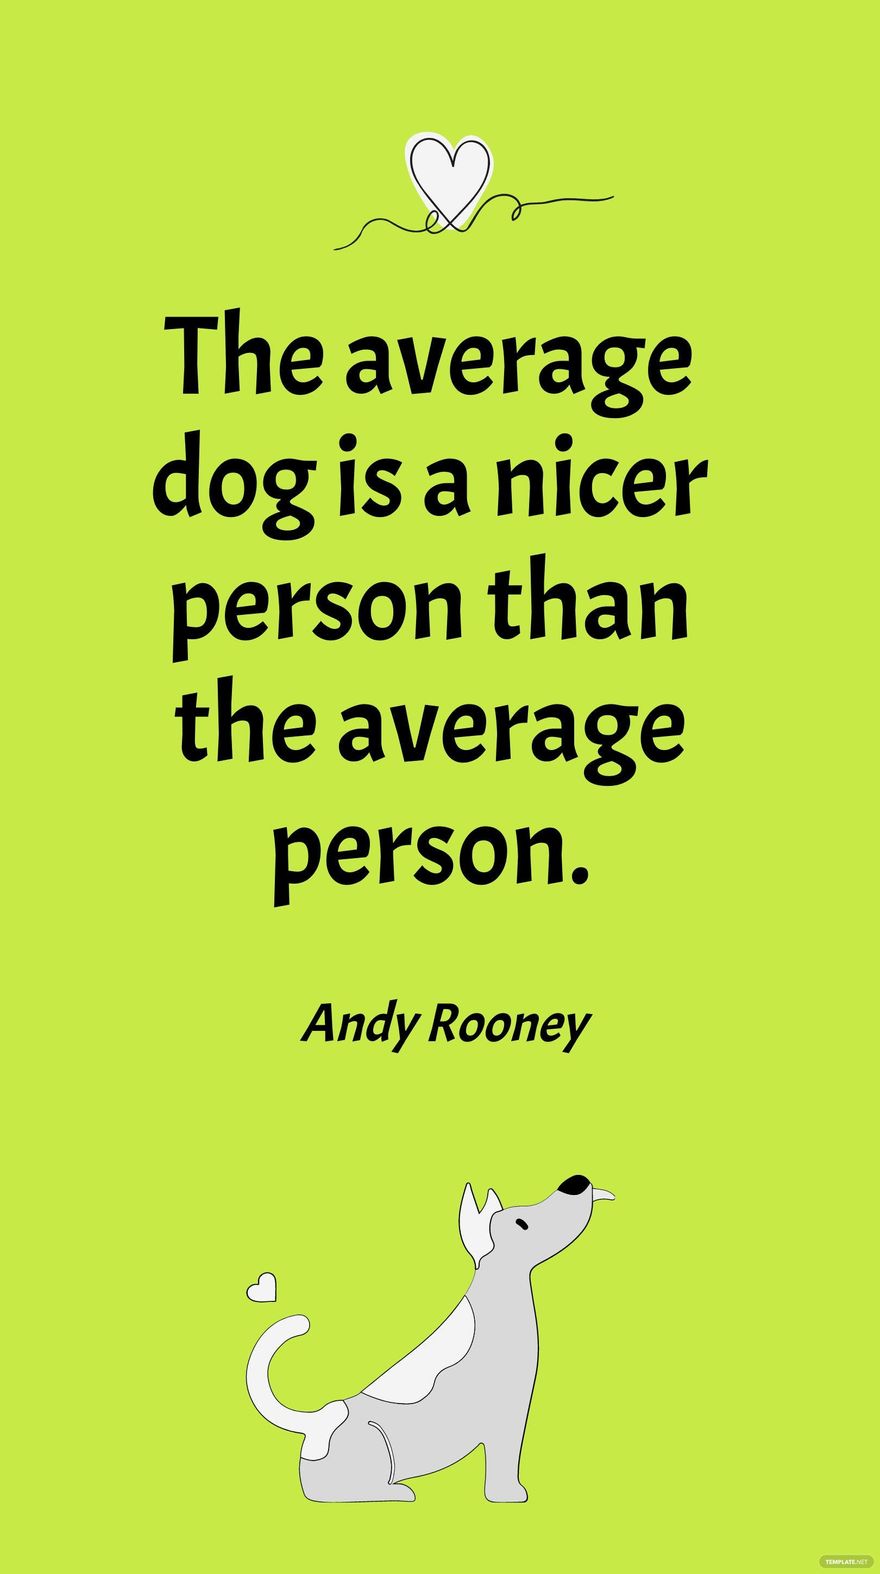 Free Andy Rooney - The average dog is a nicer person than the average person. in JPG